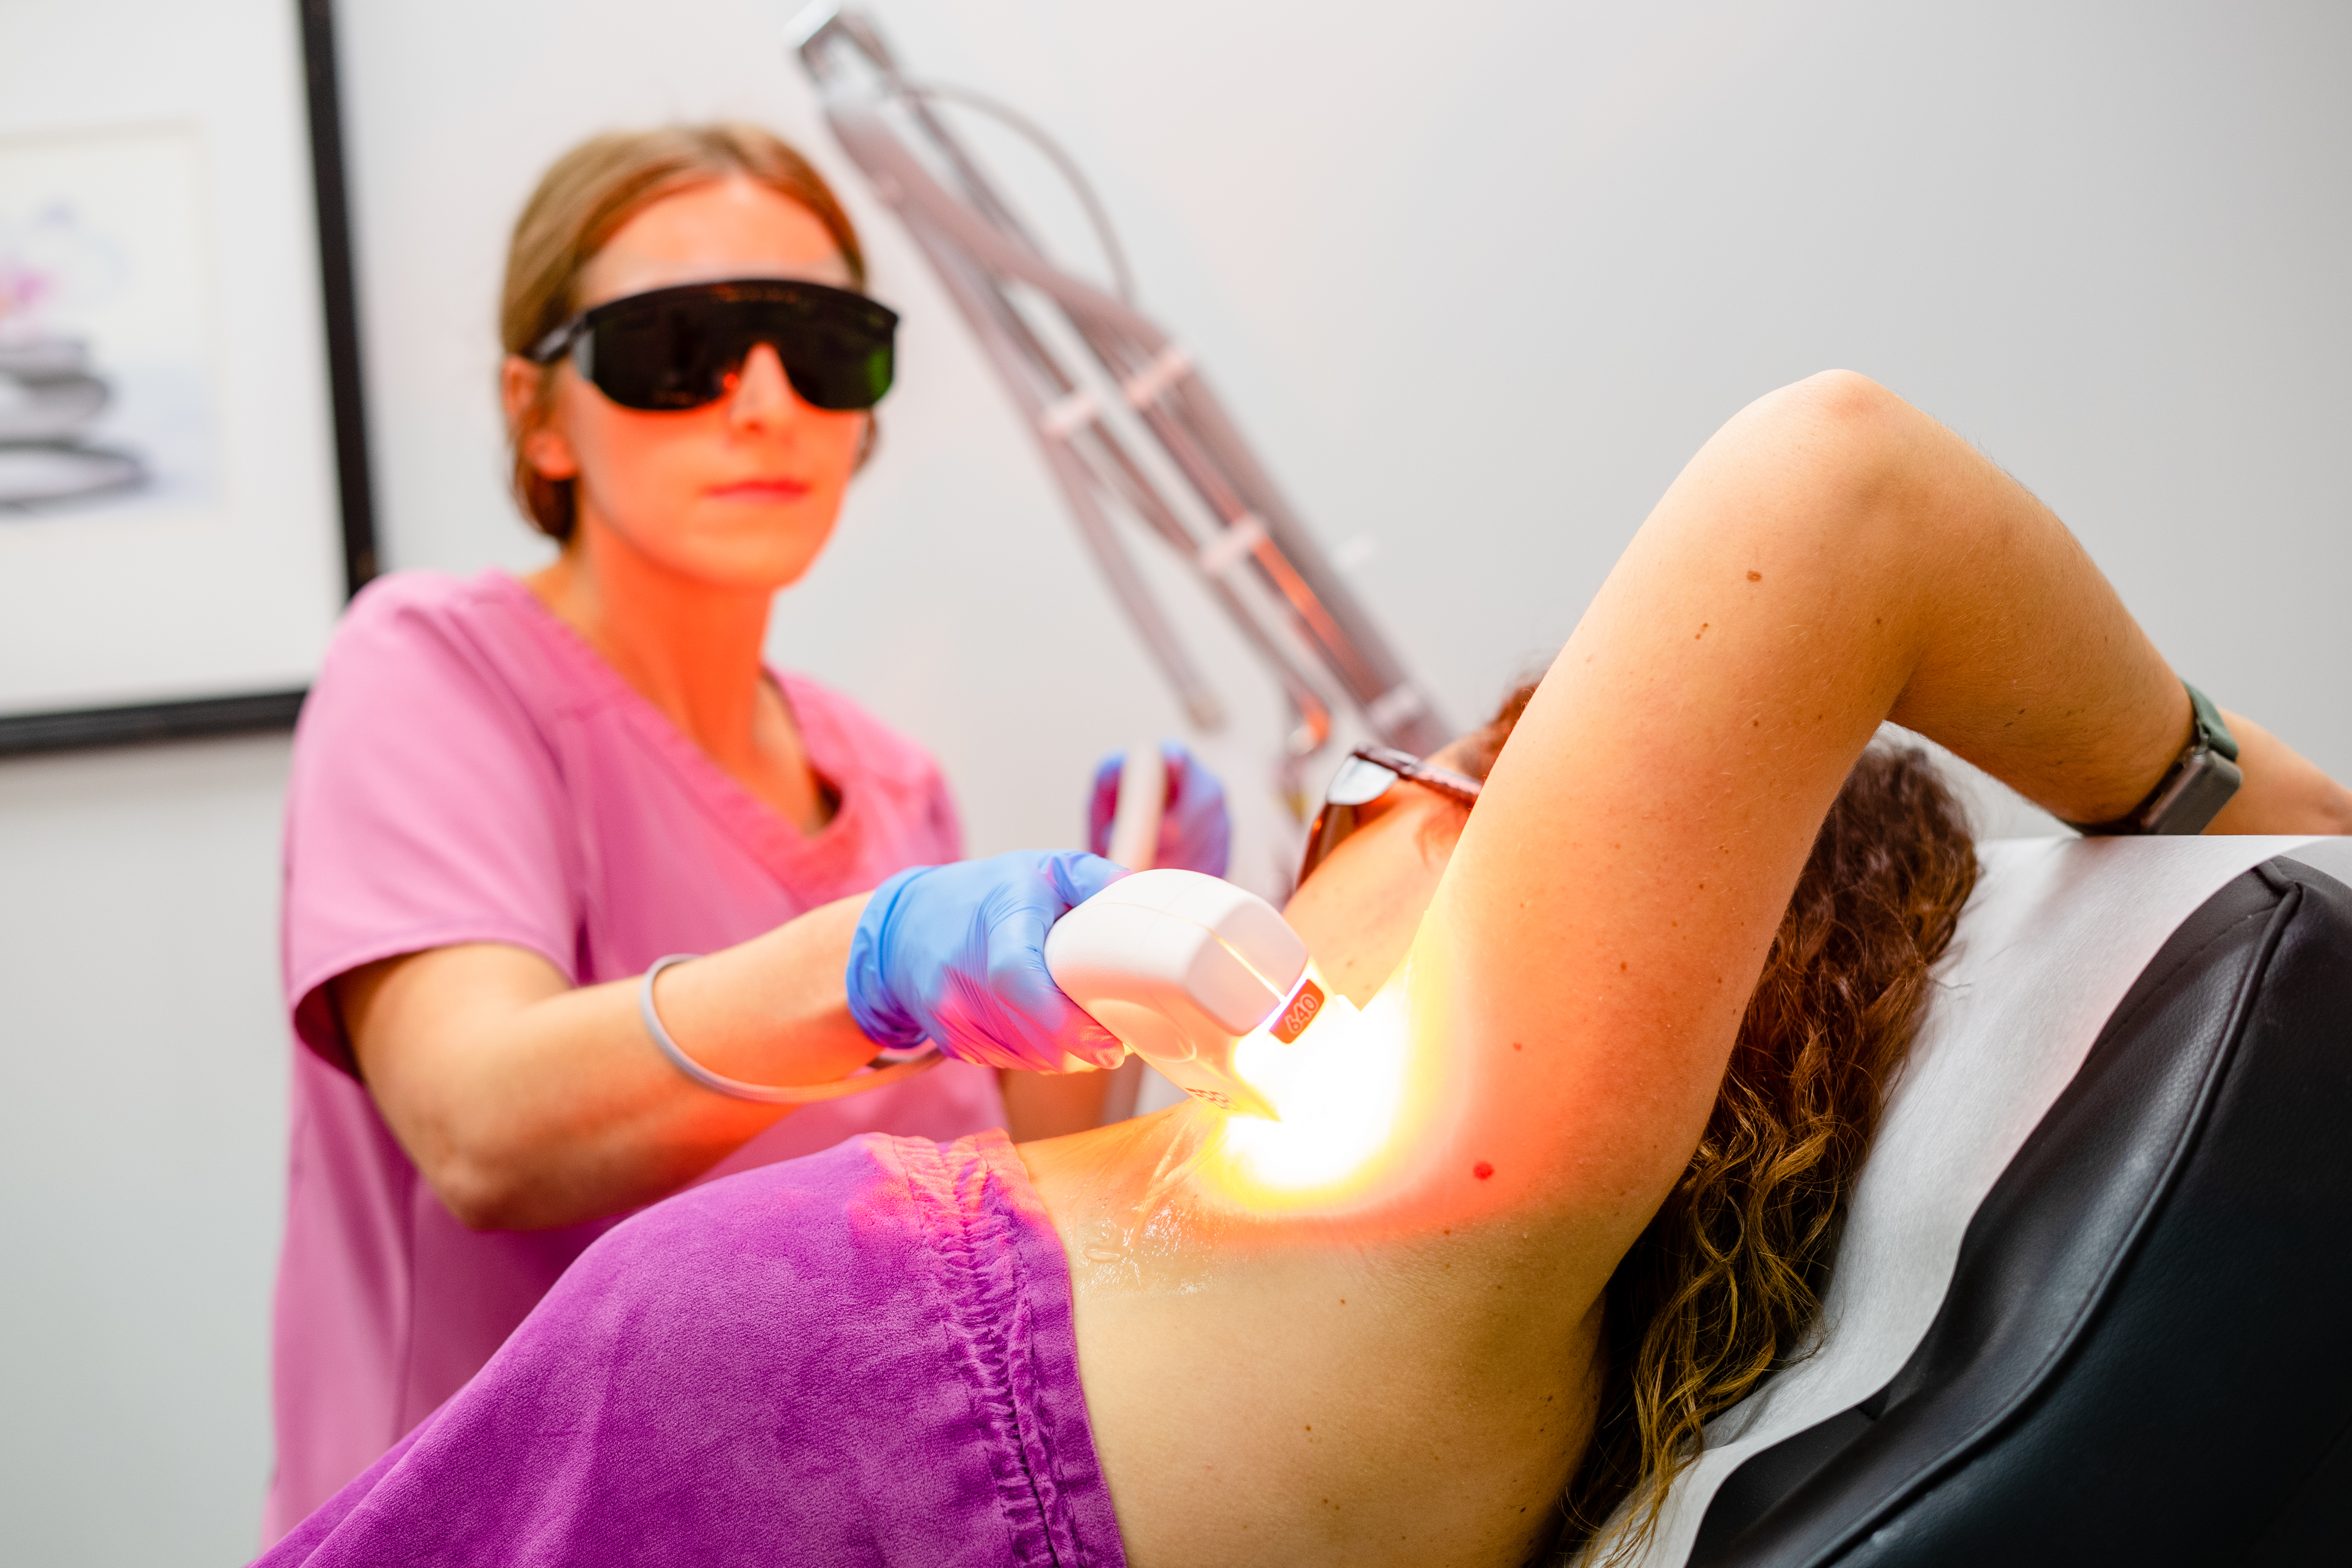 Aesthetician is performing laser hair removal on patient.